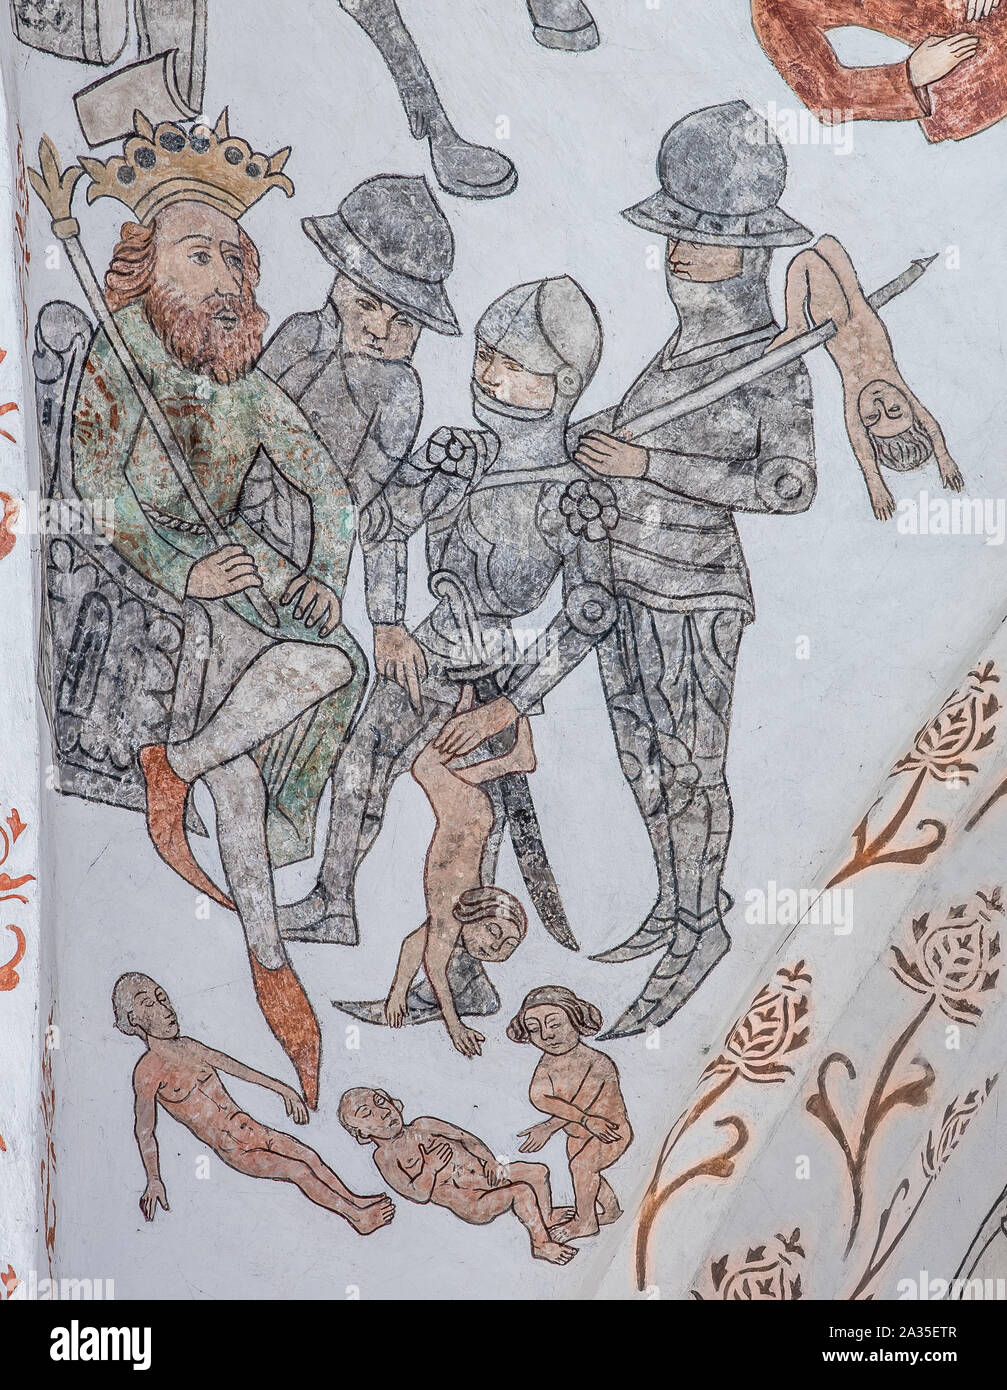 Massacre of the innocents at Bethlehem, a wall-painting from about the year 1500 in the church of St. Mary, Elsinore, Denmark, May 14, 2019 Stock Photo